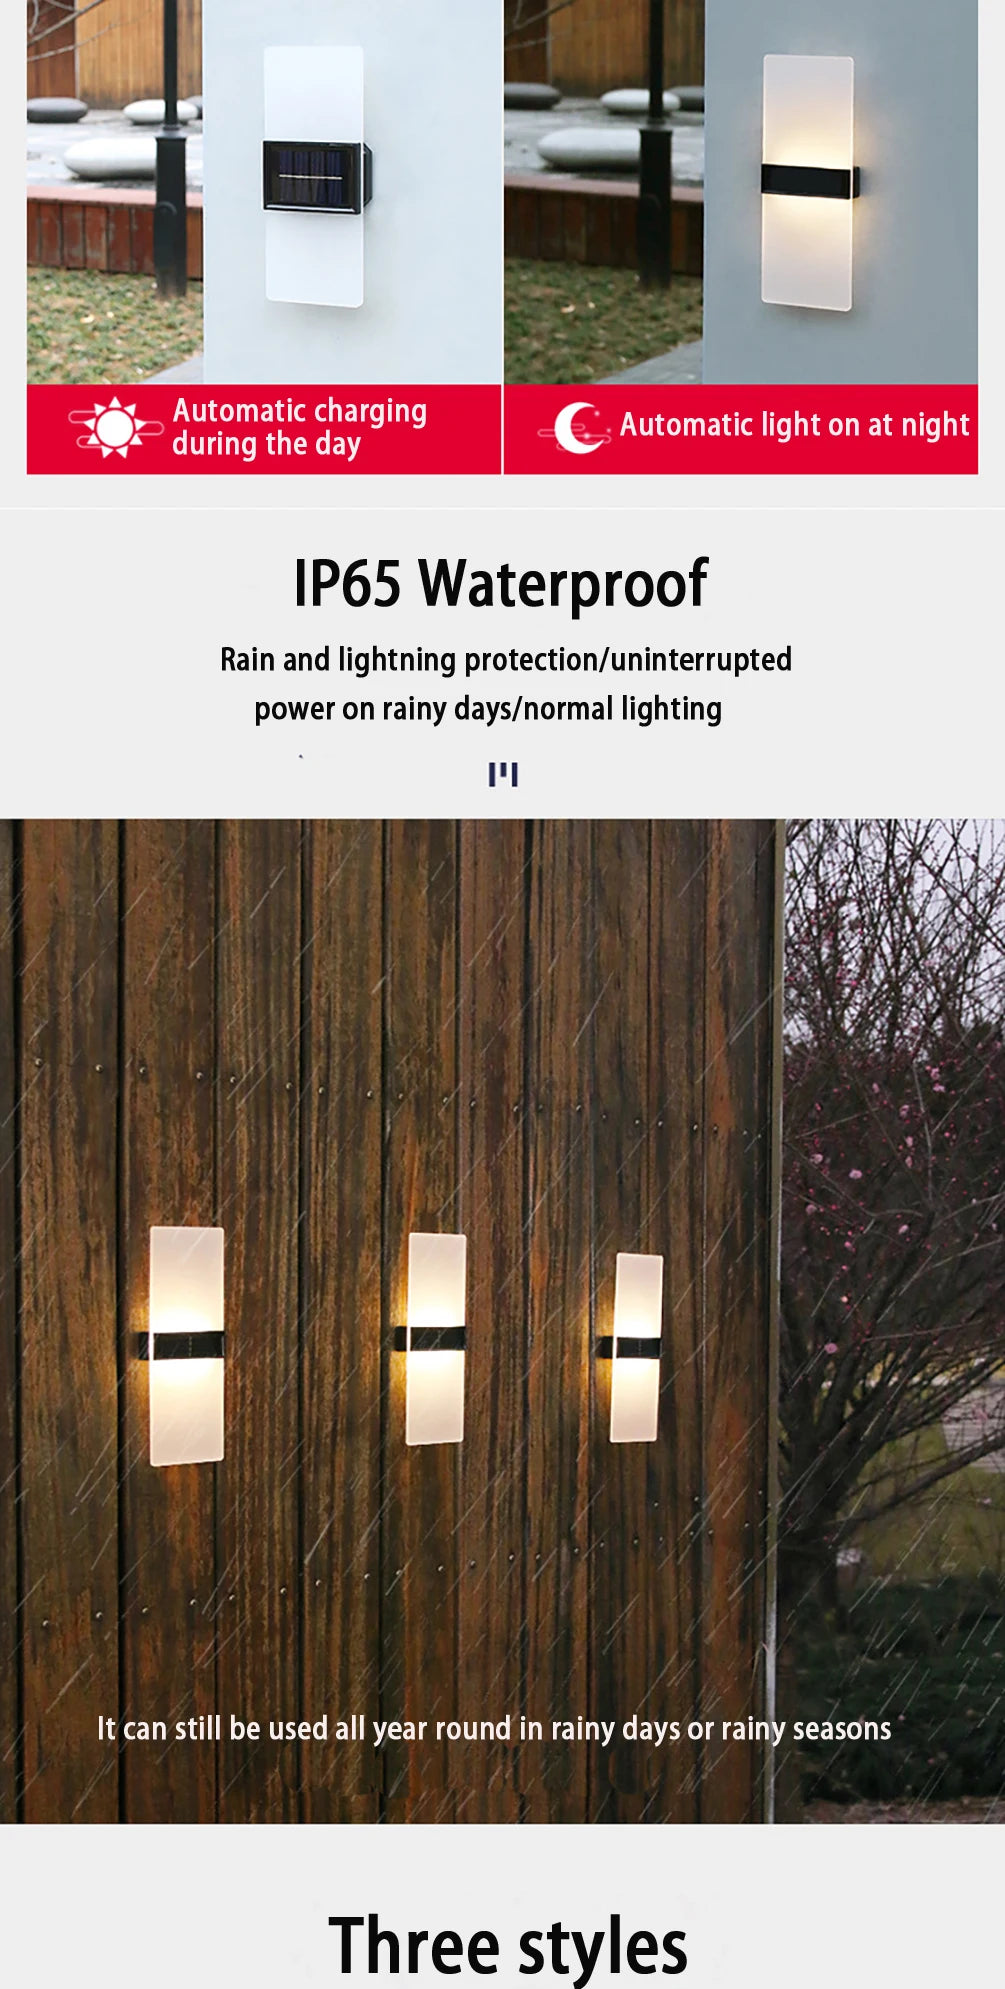 LED Solar Wall Light, Waterproof and solar-powered, this light charges automatically during the day and shines at night.